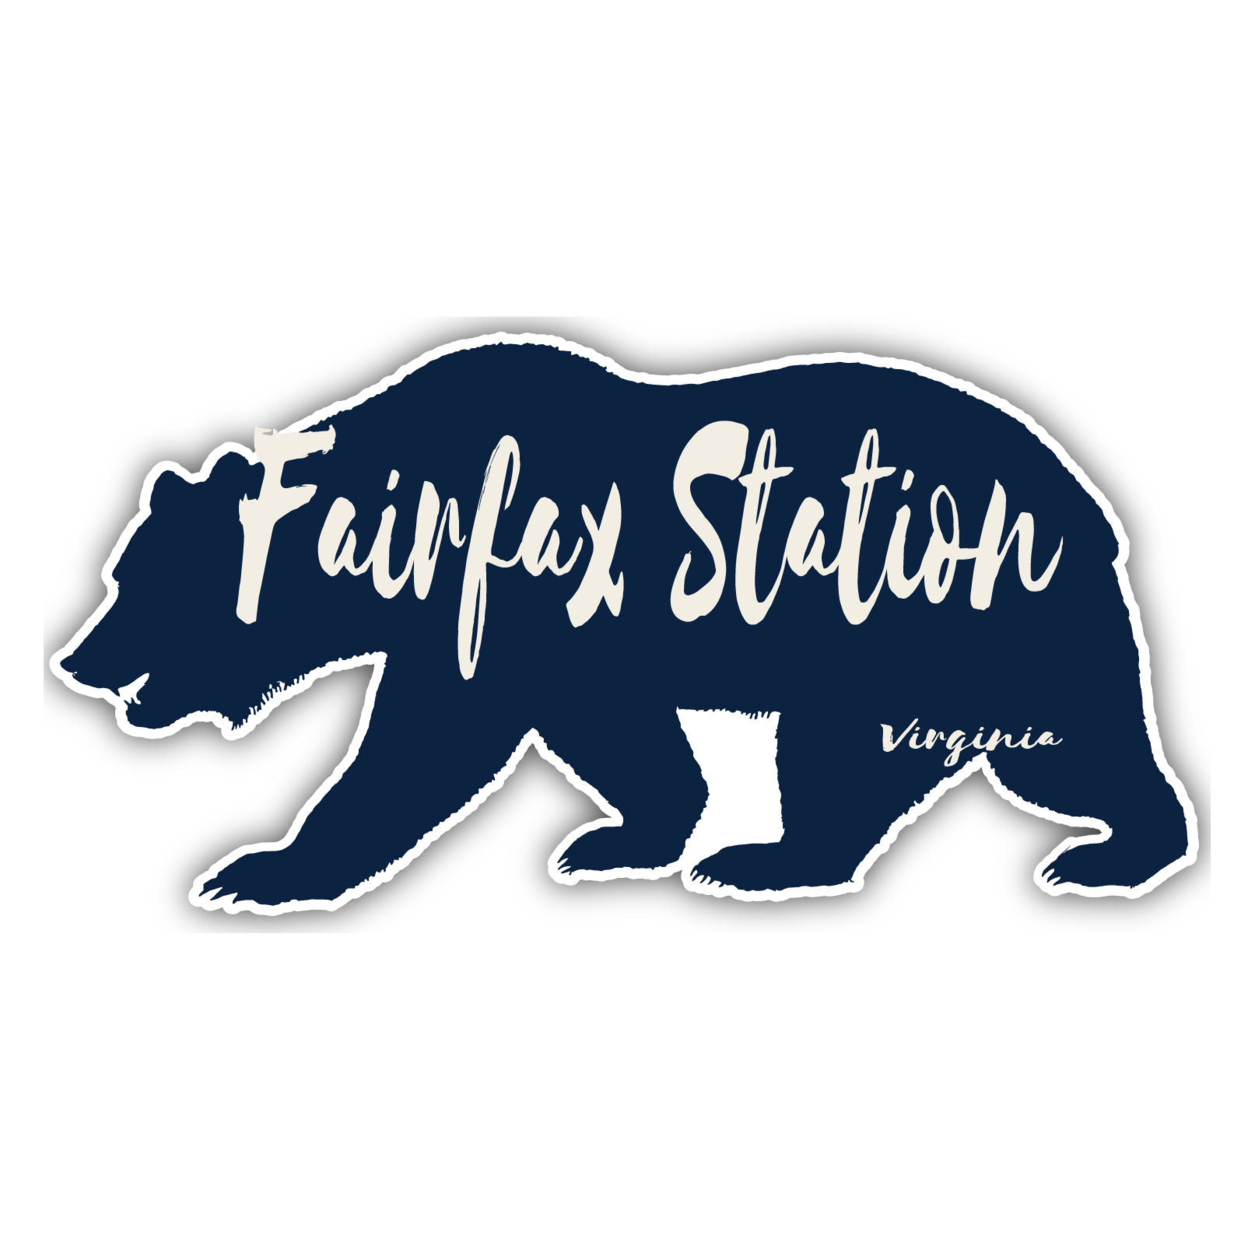 Fairfax Station Virginia Souvenir Decorative Stickers (Choose Theme And Size) - 4-Pack, 4-Inch, Bear